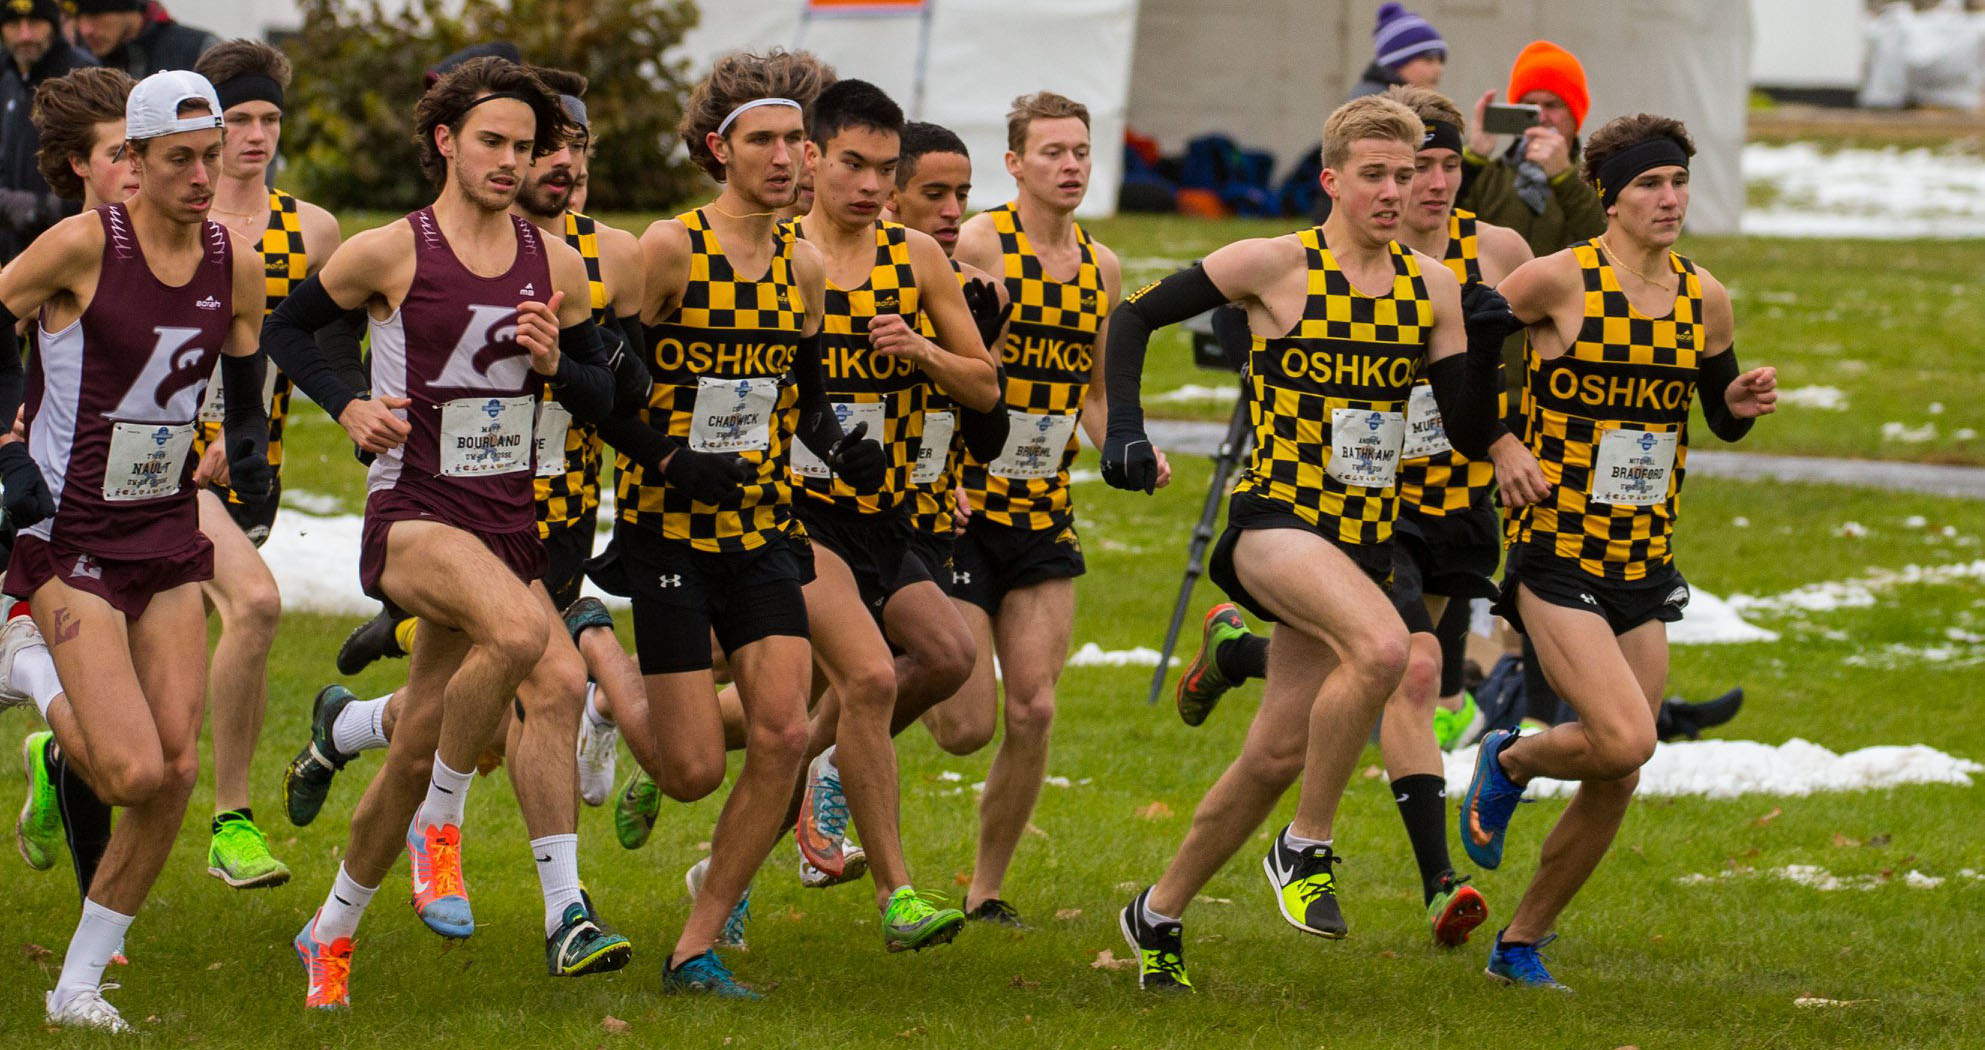 UW-Oshkosh had eight runners finish in the top 48 listings at this year's WIAC Championship.